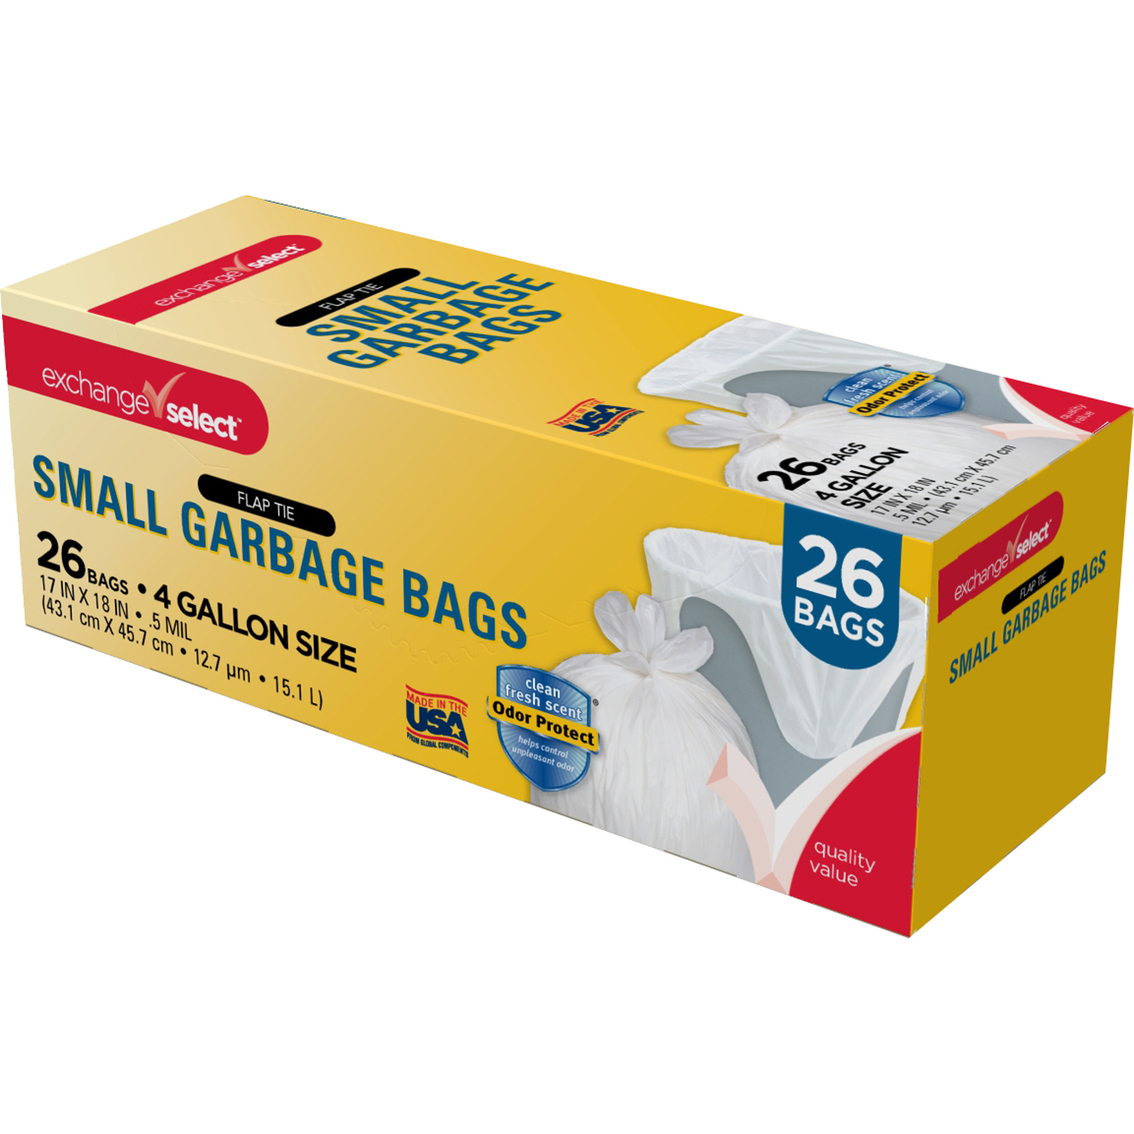 Exchange Select Small Garbage Bags 26 ct., 4 gal. - Image 3 of 3